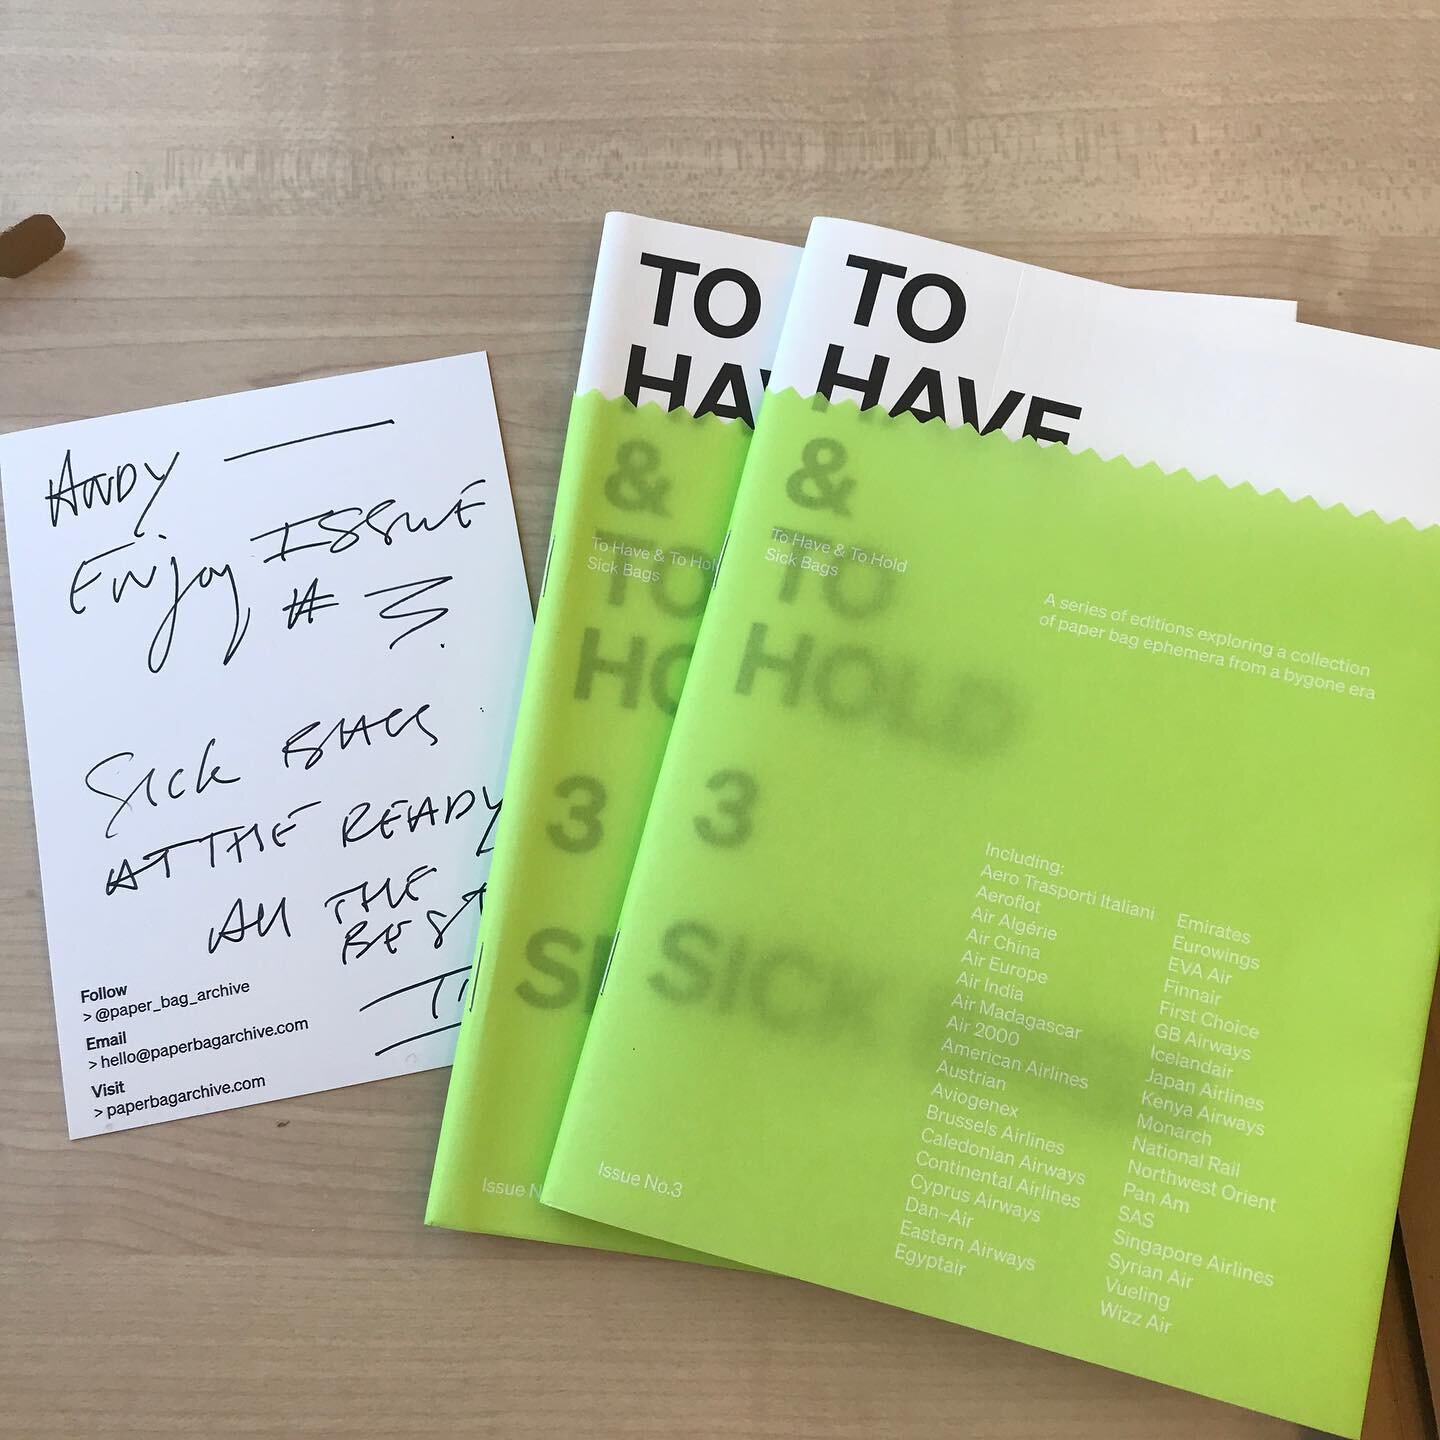 Issue 3 of &lsquo;To Have &amp; to Hold&rsquo; Tim Sumners on going paper bag archive project. A fantastic record of those small paper based ephemera items.